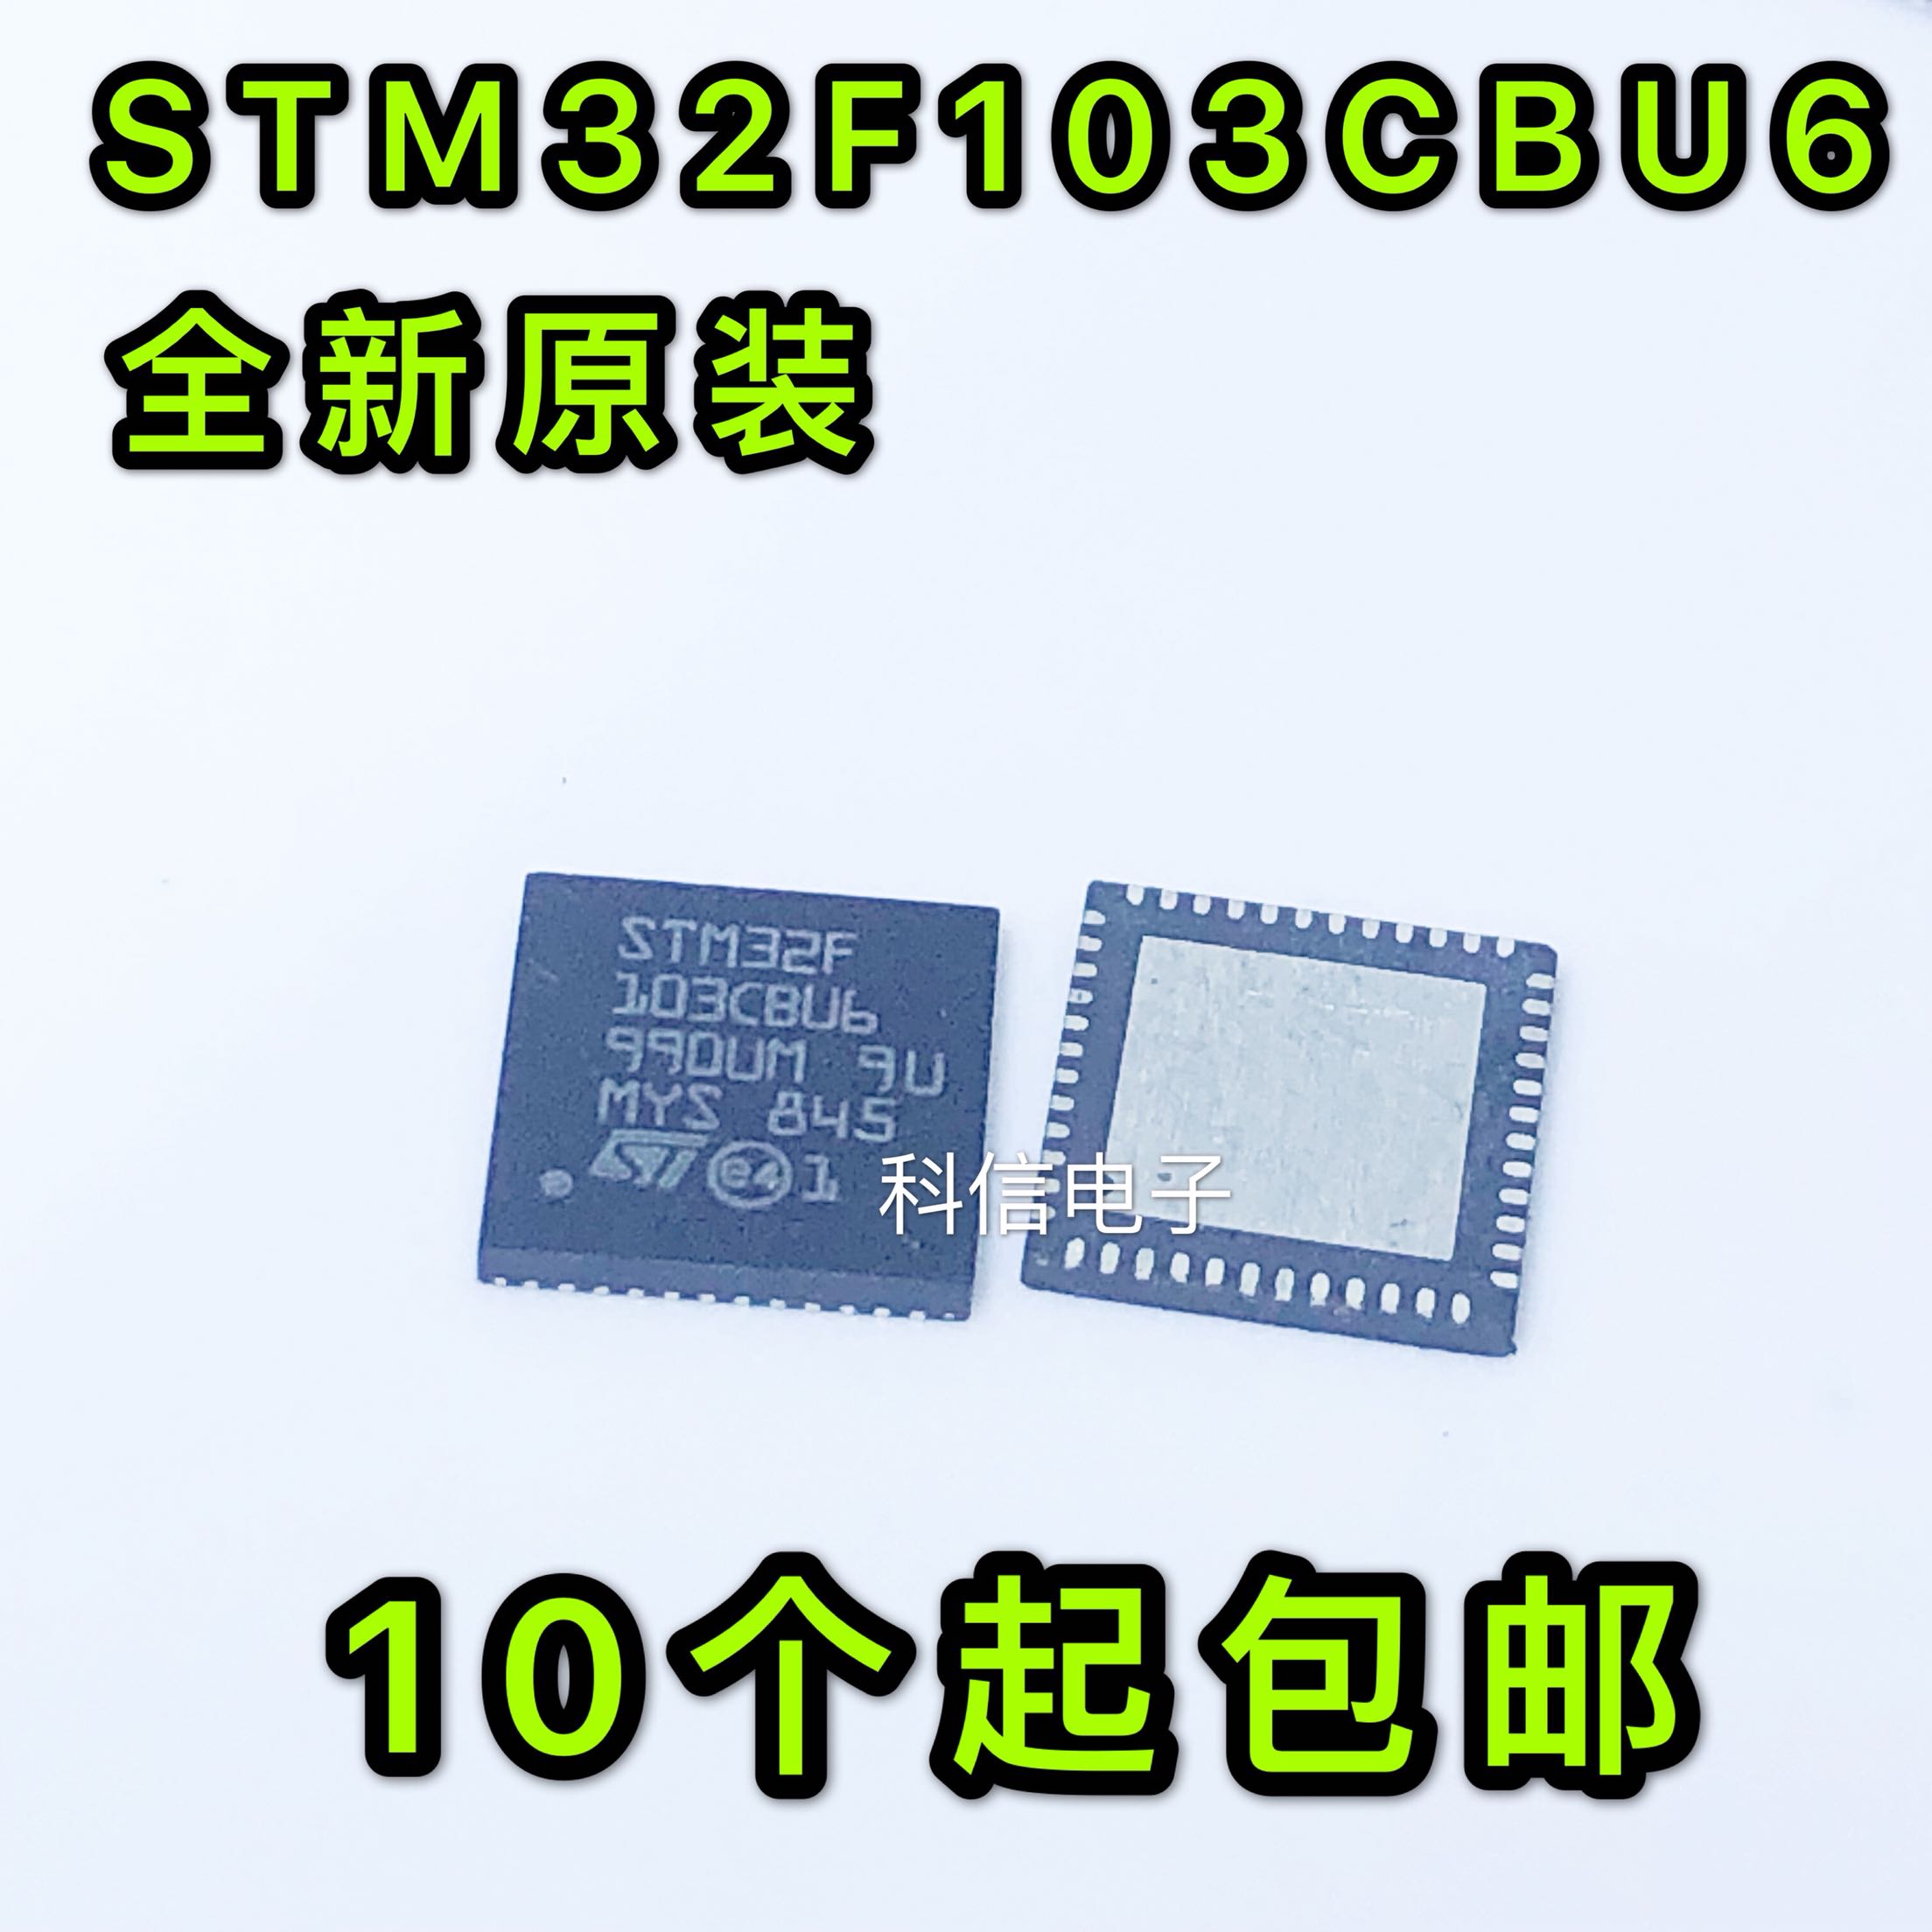 New imported STM32F103CBU6 QFN48 microcontroller chip